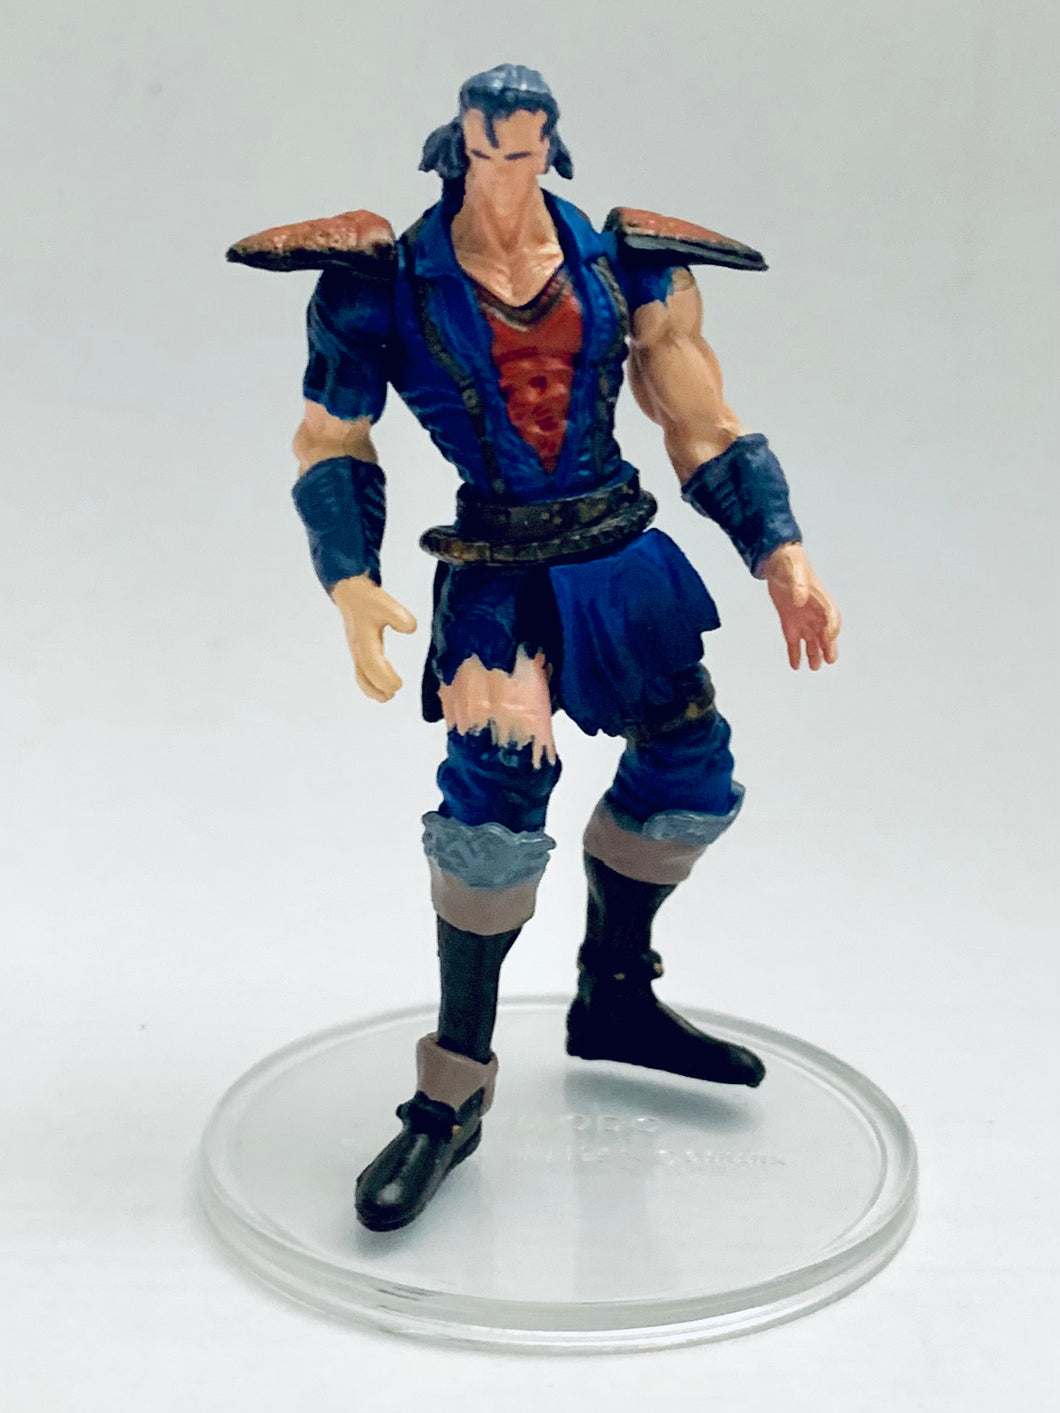 Hokuto no Ken - Shu - Fist of the North Star All-Star Retsuden Capsule Figure Collection Part 1 - Repainted ver.